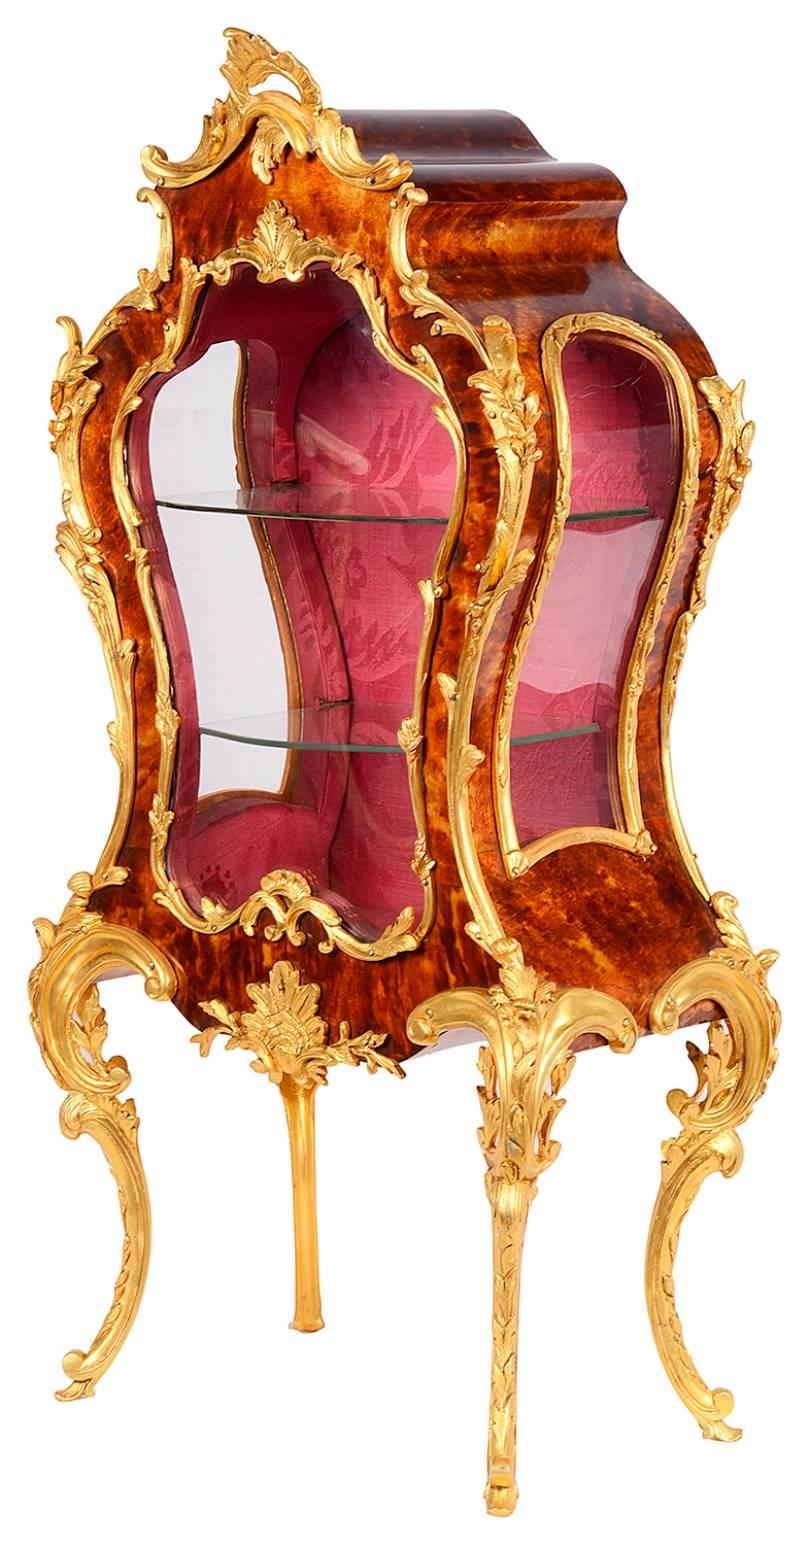 A good quality late 19th century Louis XVI style gilded ormolu and tortoiseshell miniature table vitrine, in the Rococo style. Being of bombe form and raised on elegant cabriole legs. The back panel hinges open to reveal two glass shelves.